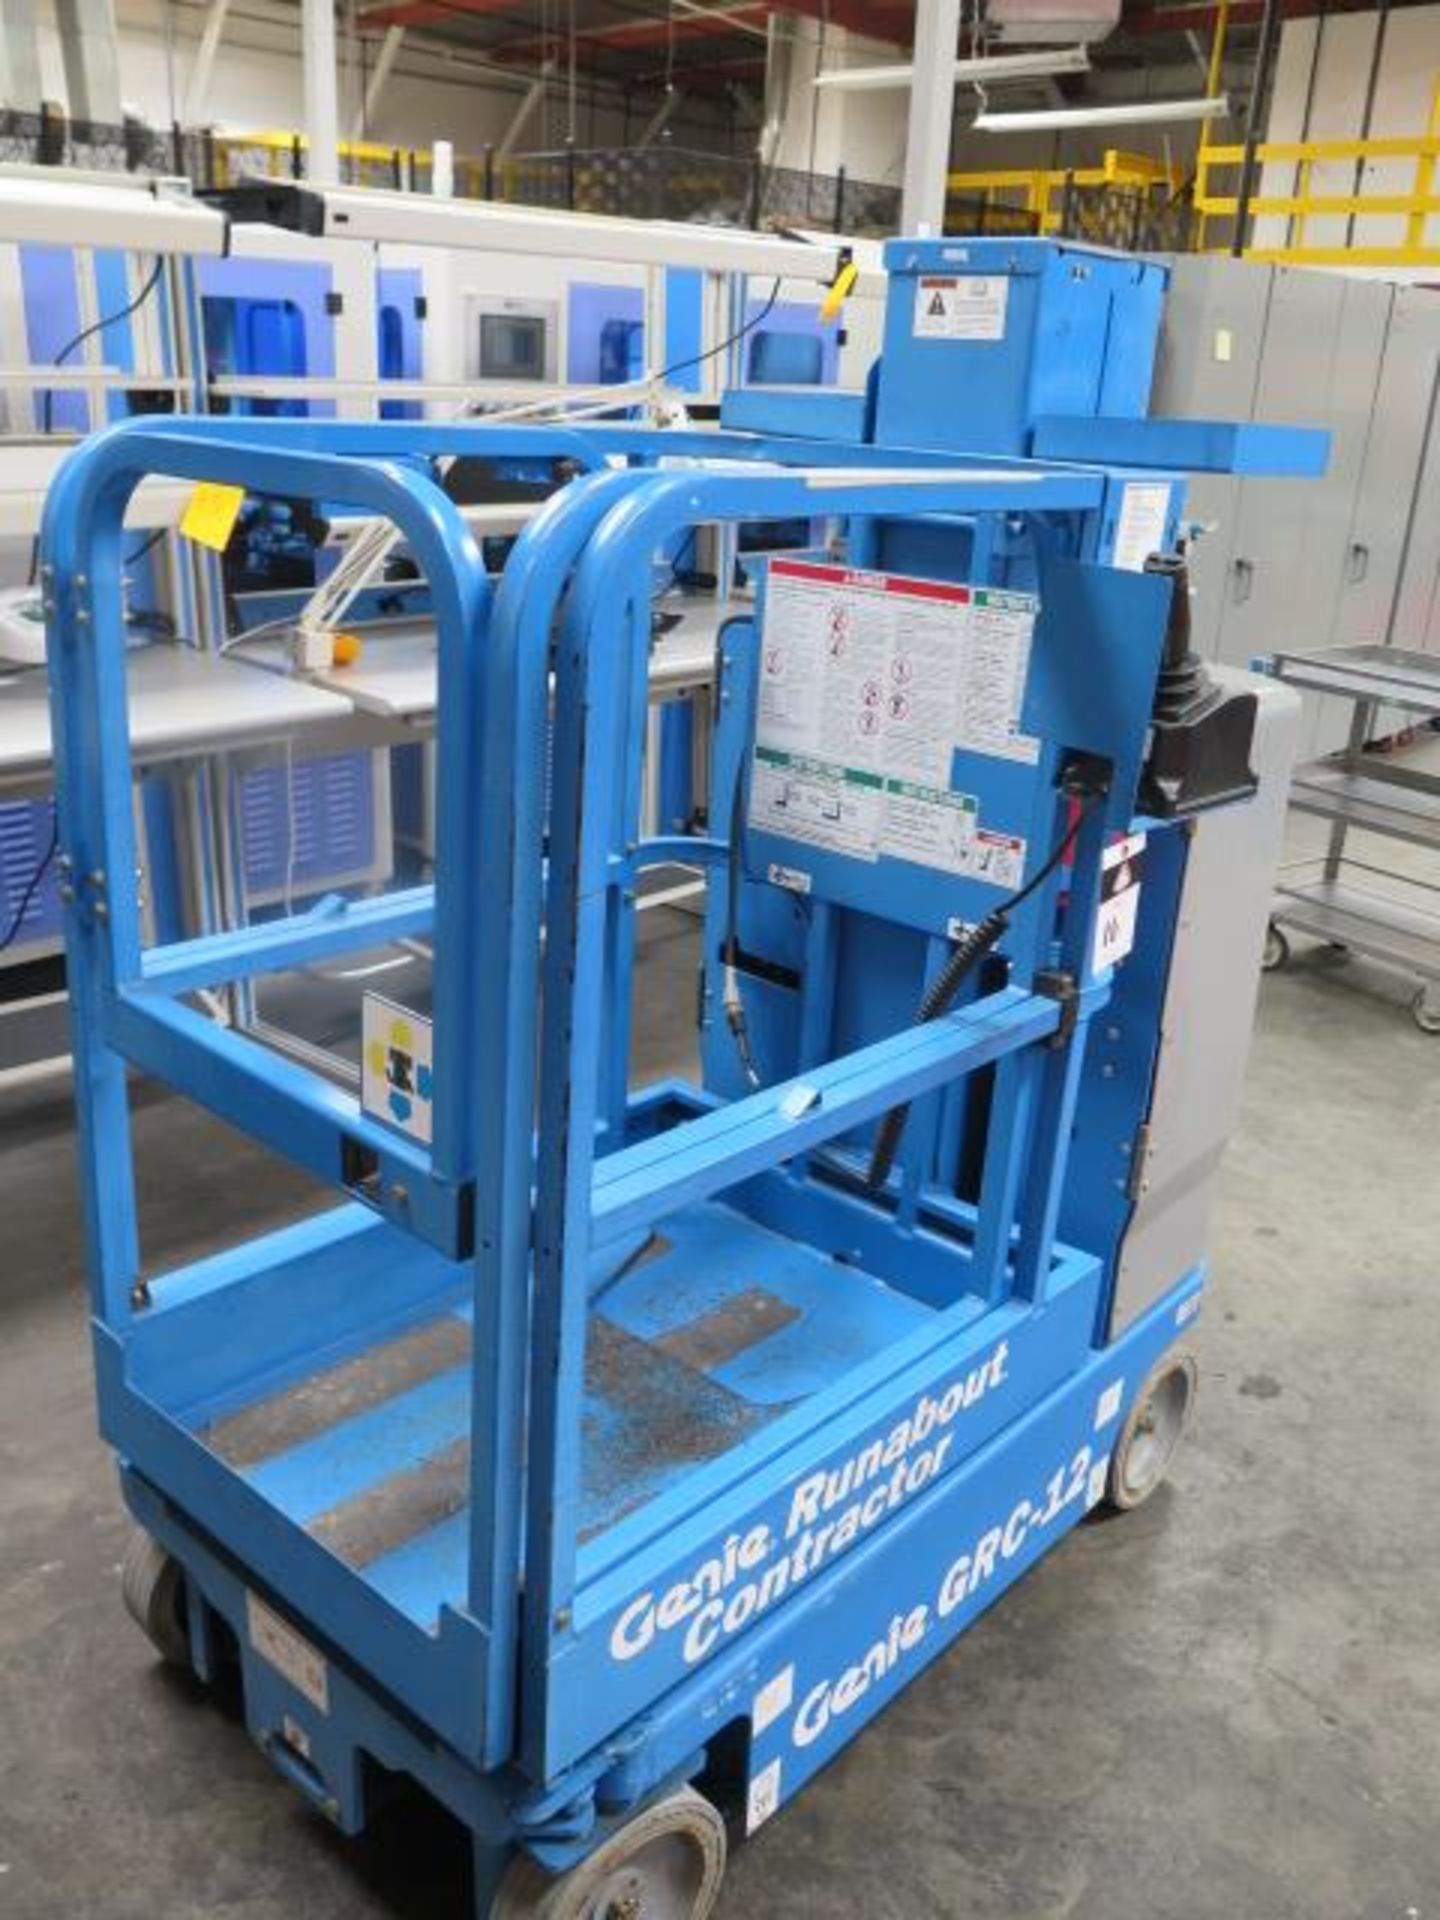 2010 Genie GRC-12 "Runabout Contractor" Electric Platform Lift s/n GRC10-315 w/ 12' Lift, SOLD AS IS - Image 2 of 14